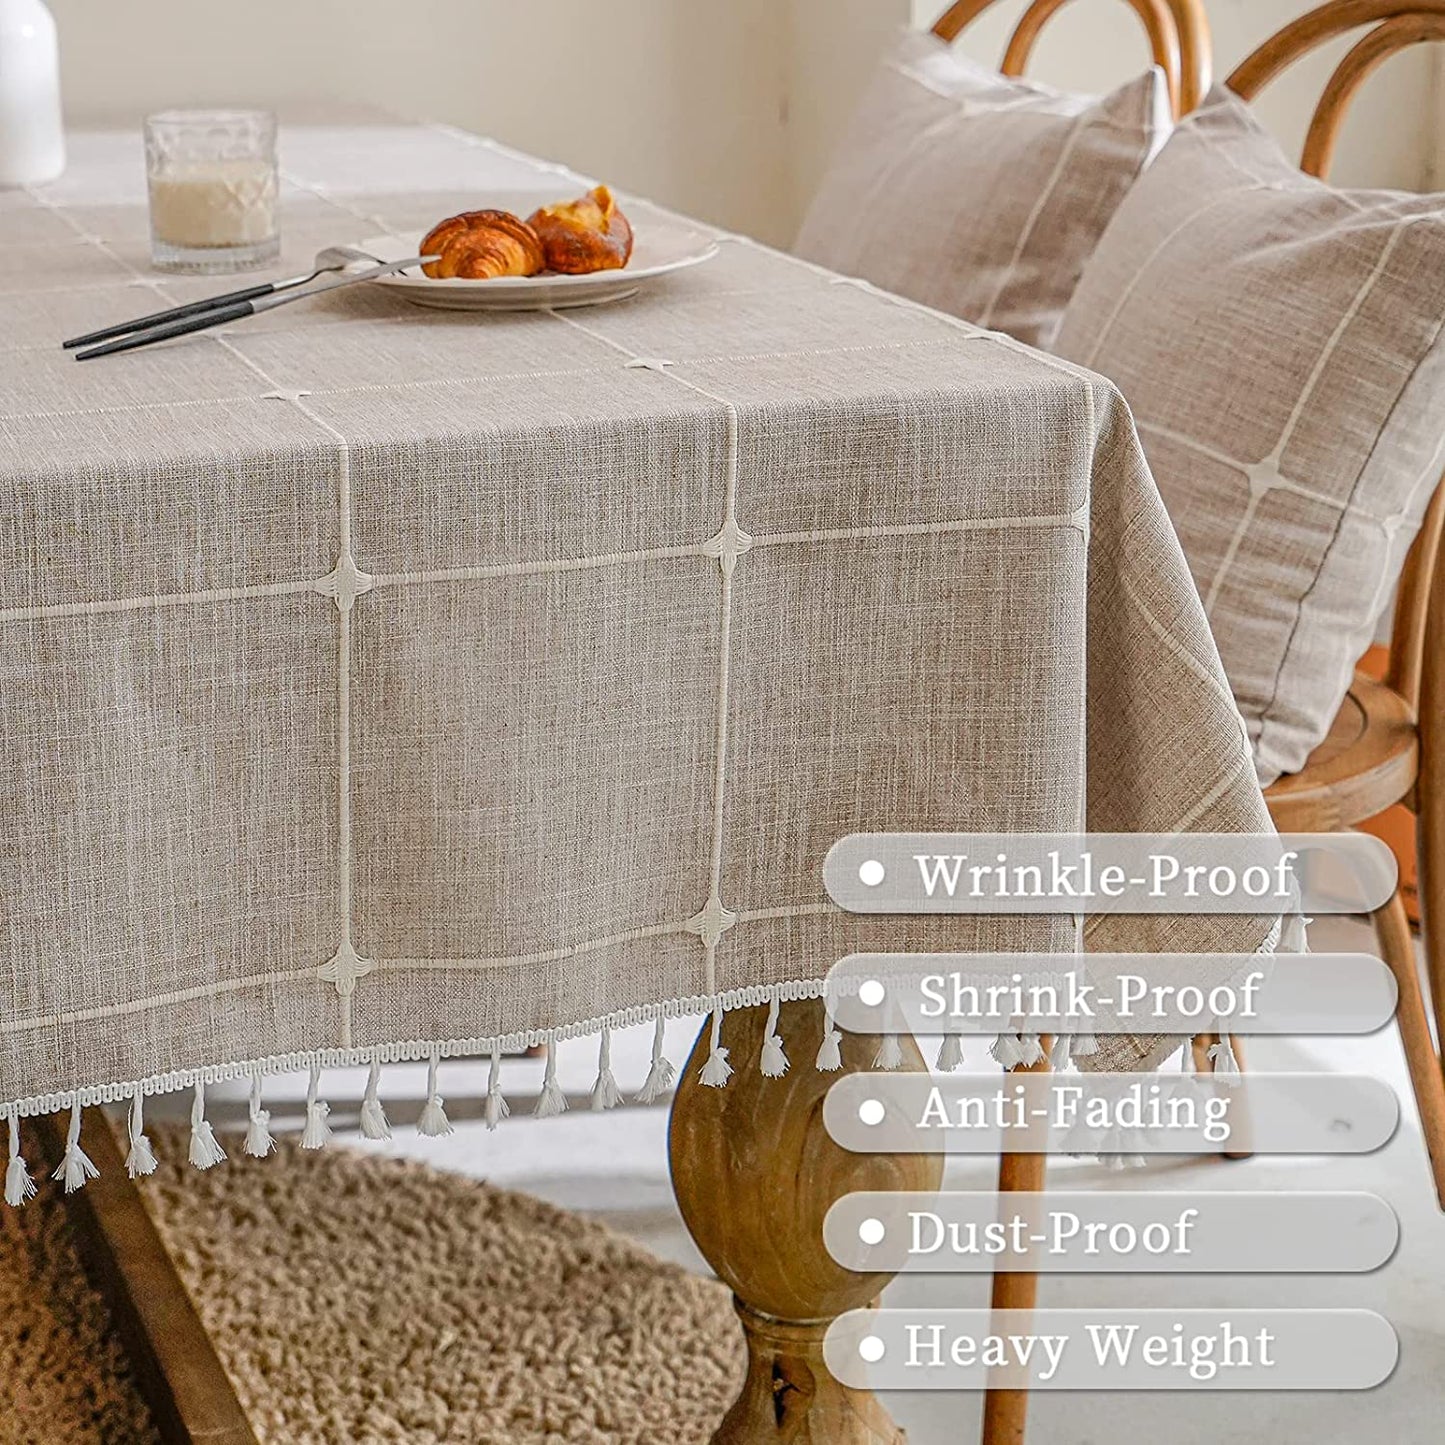 Mokani Solid Embroidery Checkered Table Cloth Washable Cotton Linen Tassel Tablecloth, Rectangle Wrinkle Free Anti-Fading Table Cover for Kitchen Dinning Thanksgiving Christmas (55 x 102 Inch, Brown) - (For 6 piece(s))